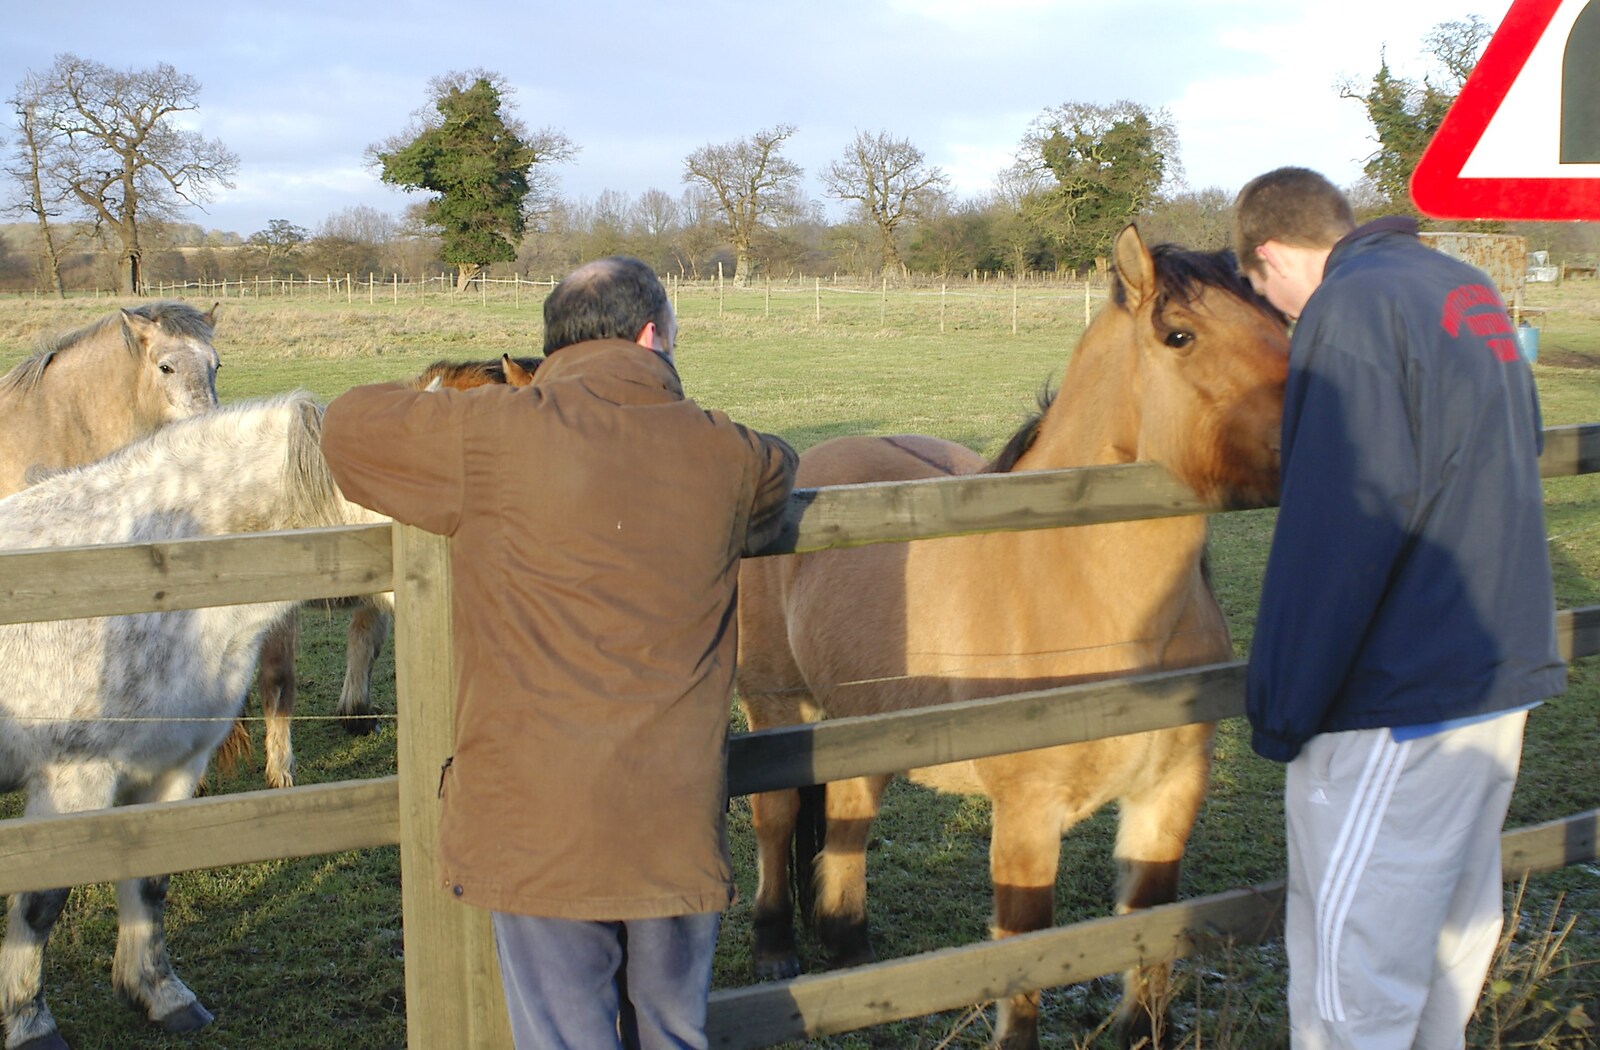 DH and The Boy Phil with ponies from Boxing Day Rambles, Hoxne and Oakley, Suffolk - 26th December 2004